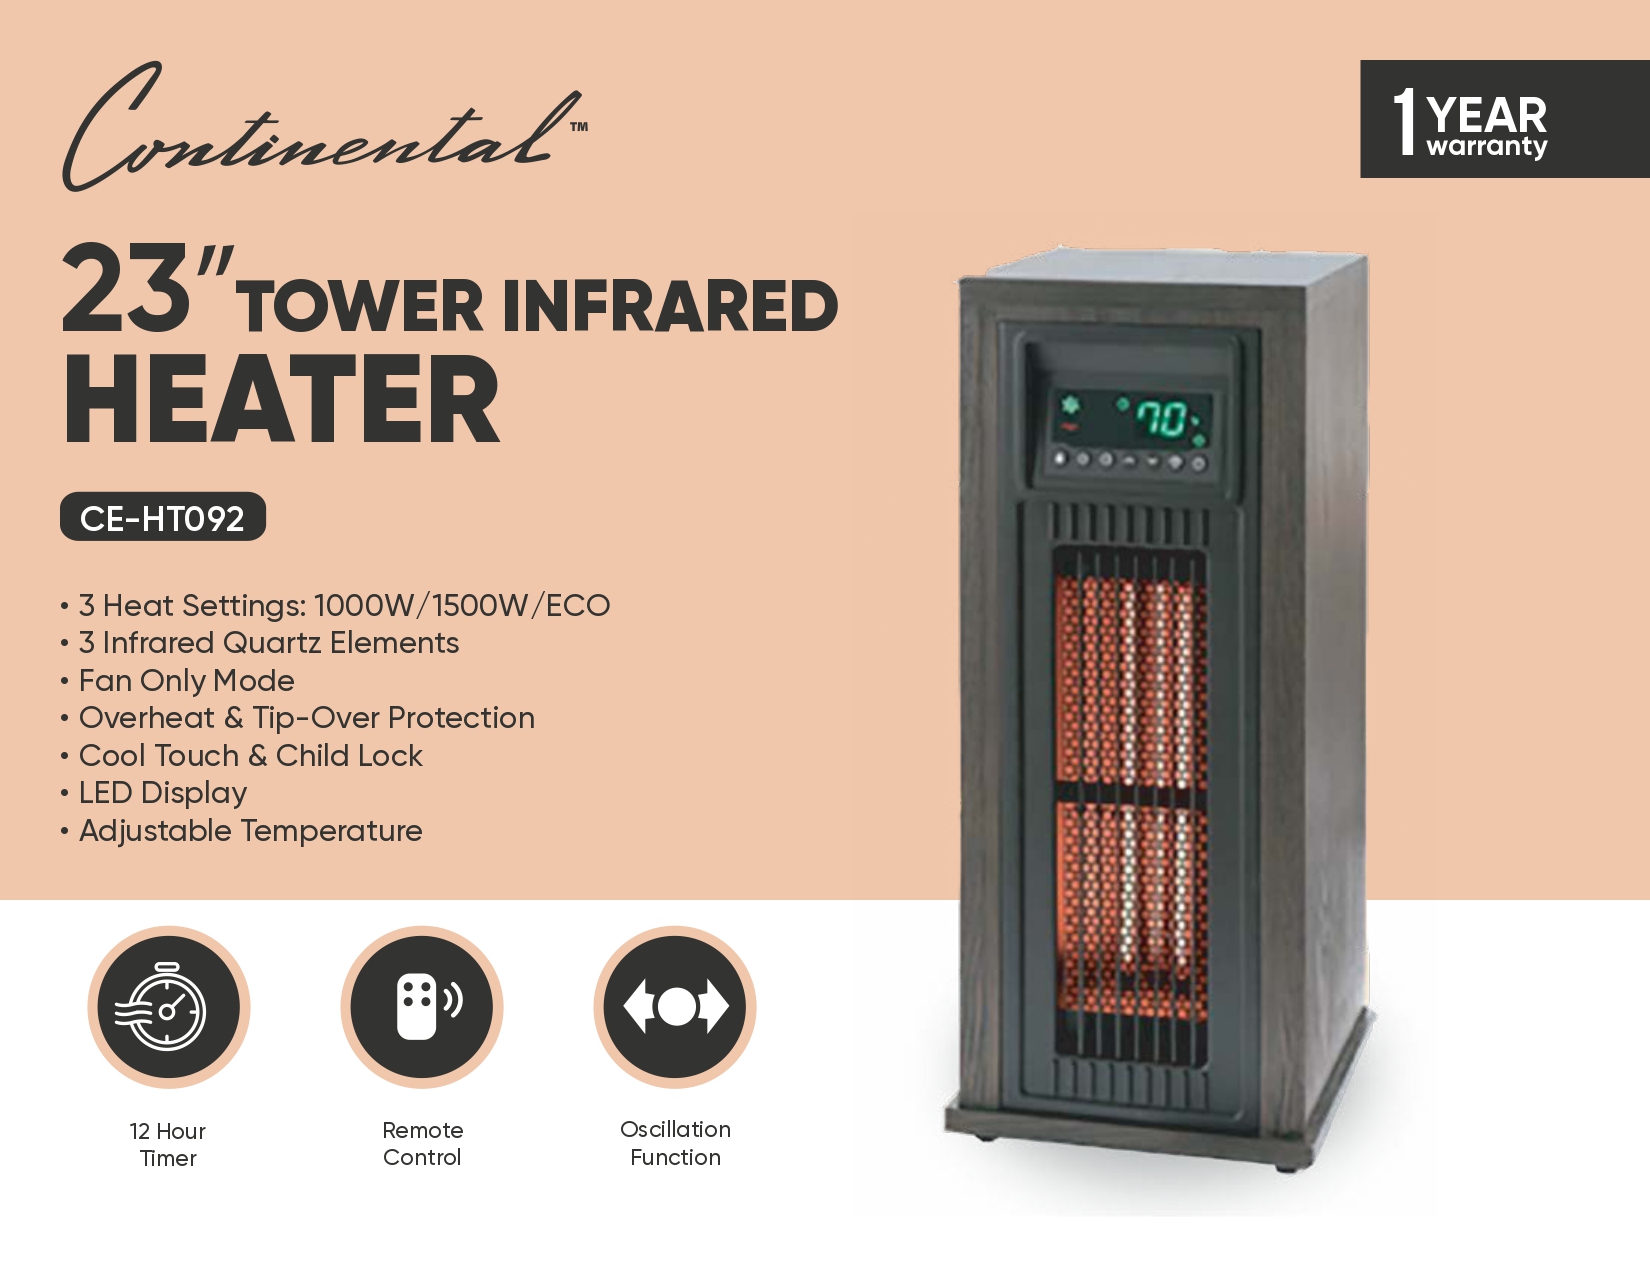 23” TOWER INFRARED HEATER